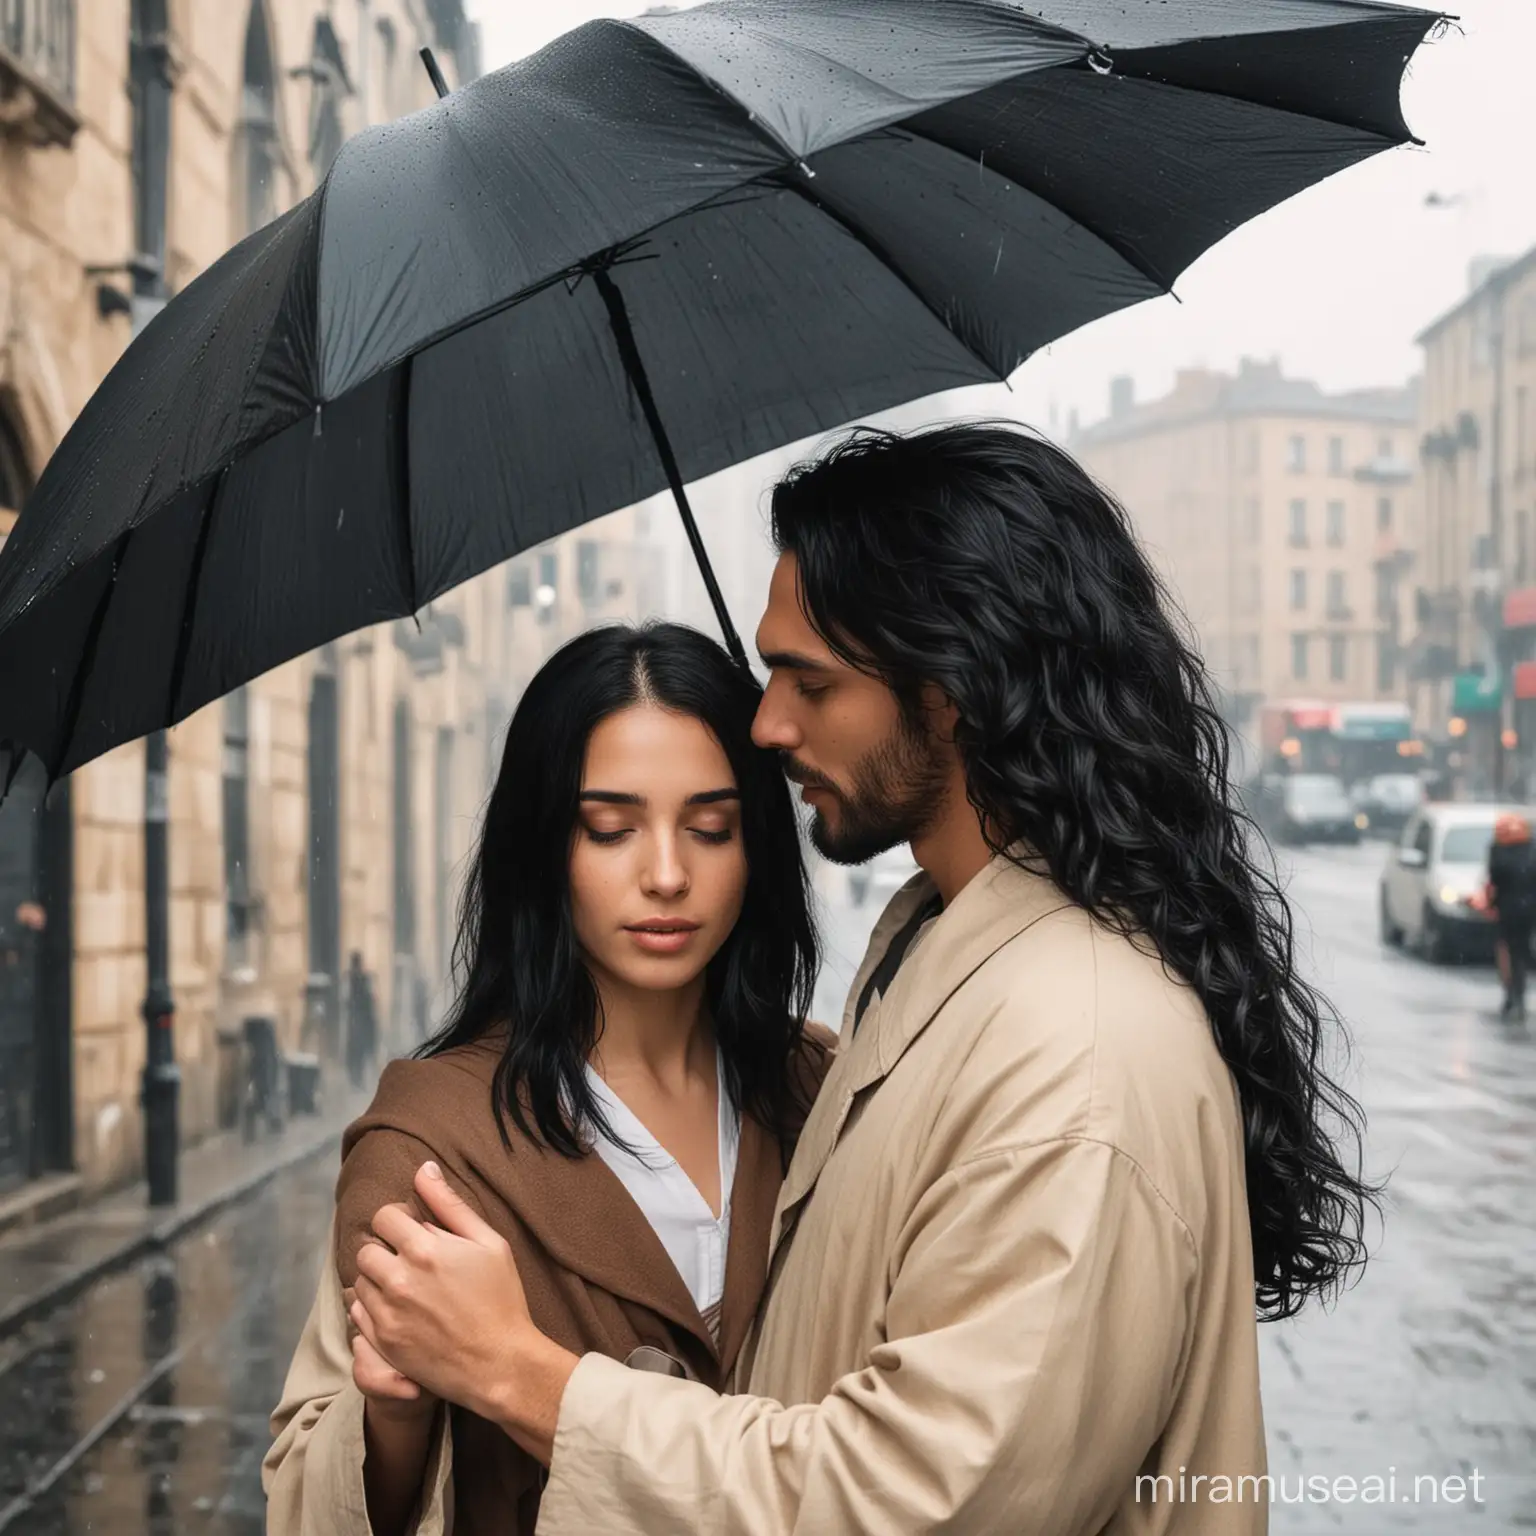 Jesus covering a young woman with black hair with his umbrella in a city